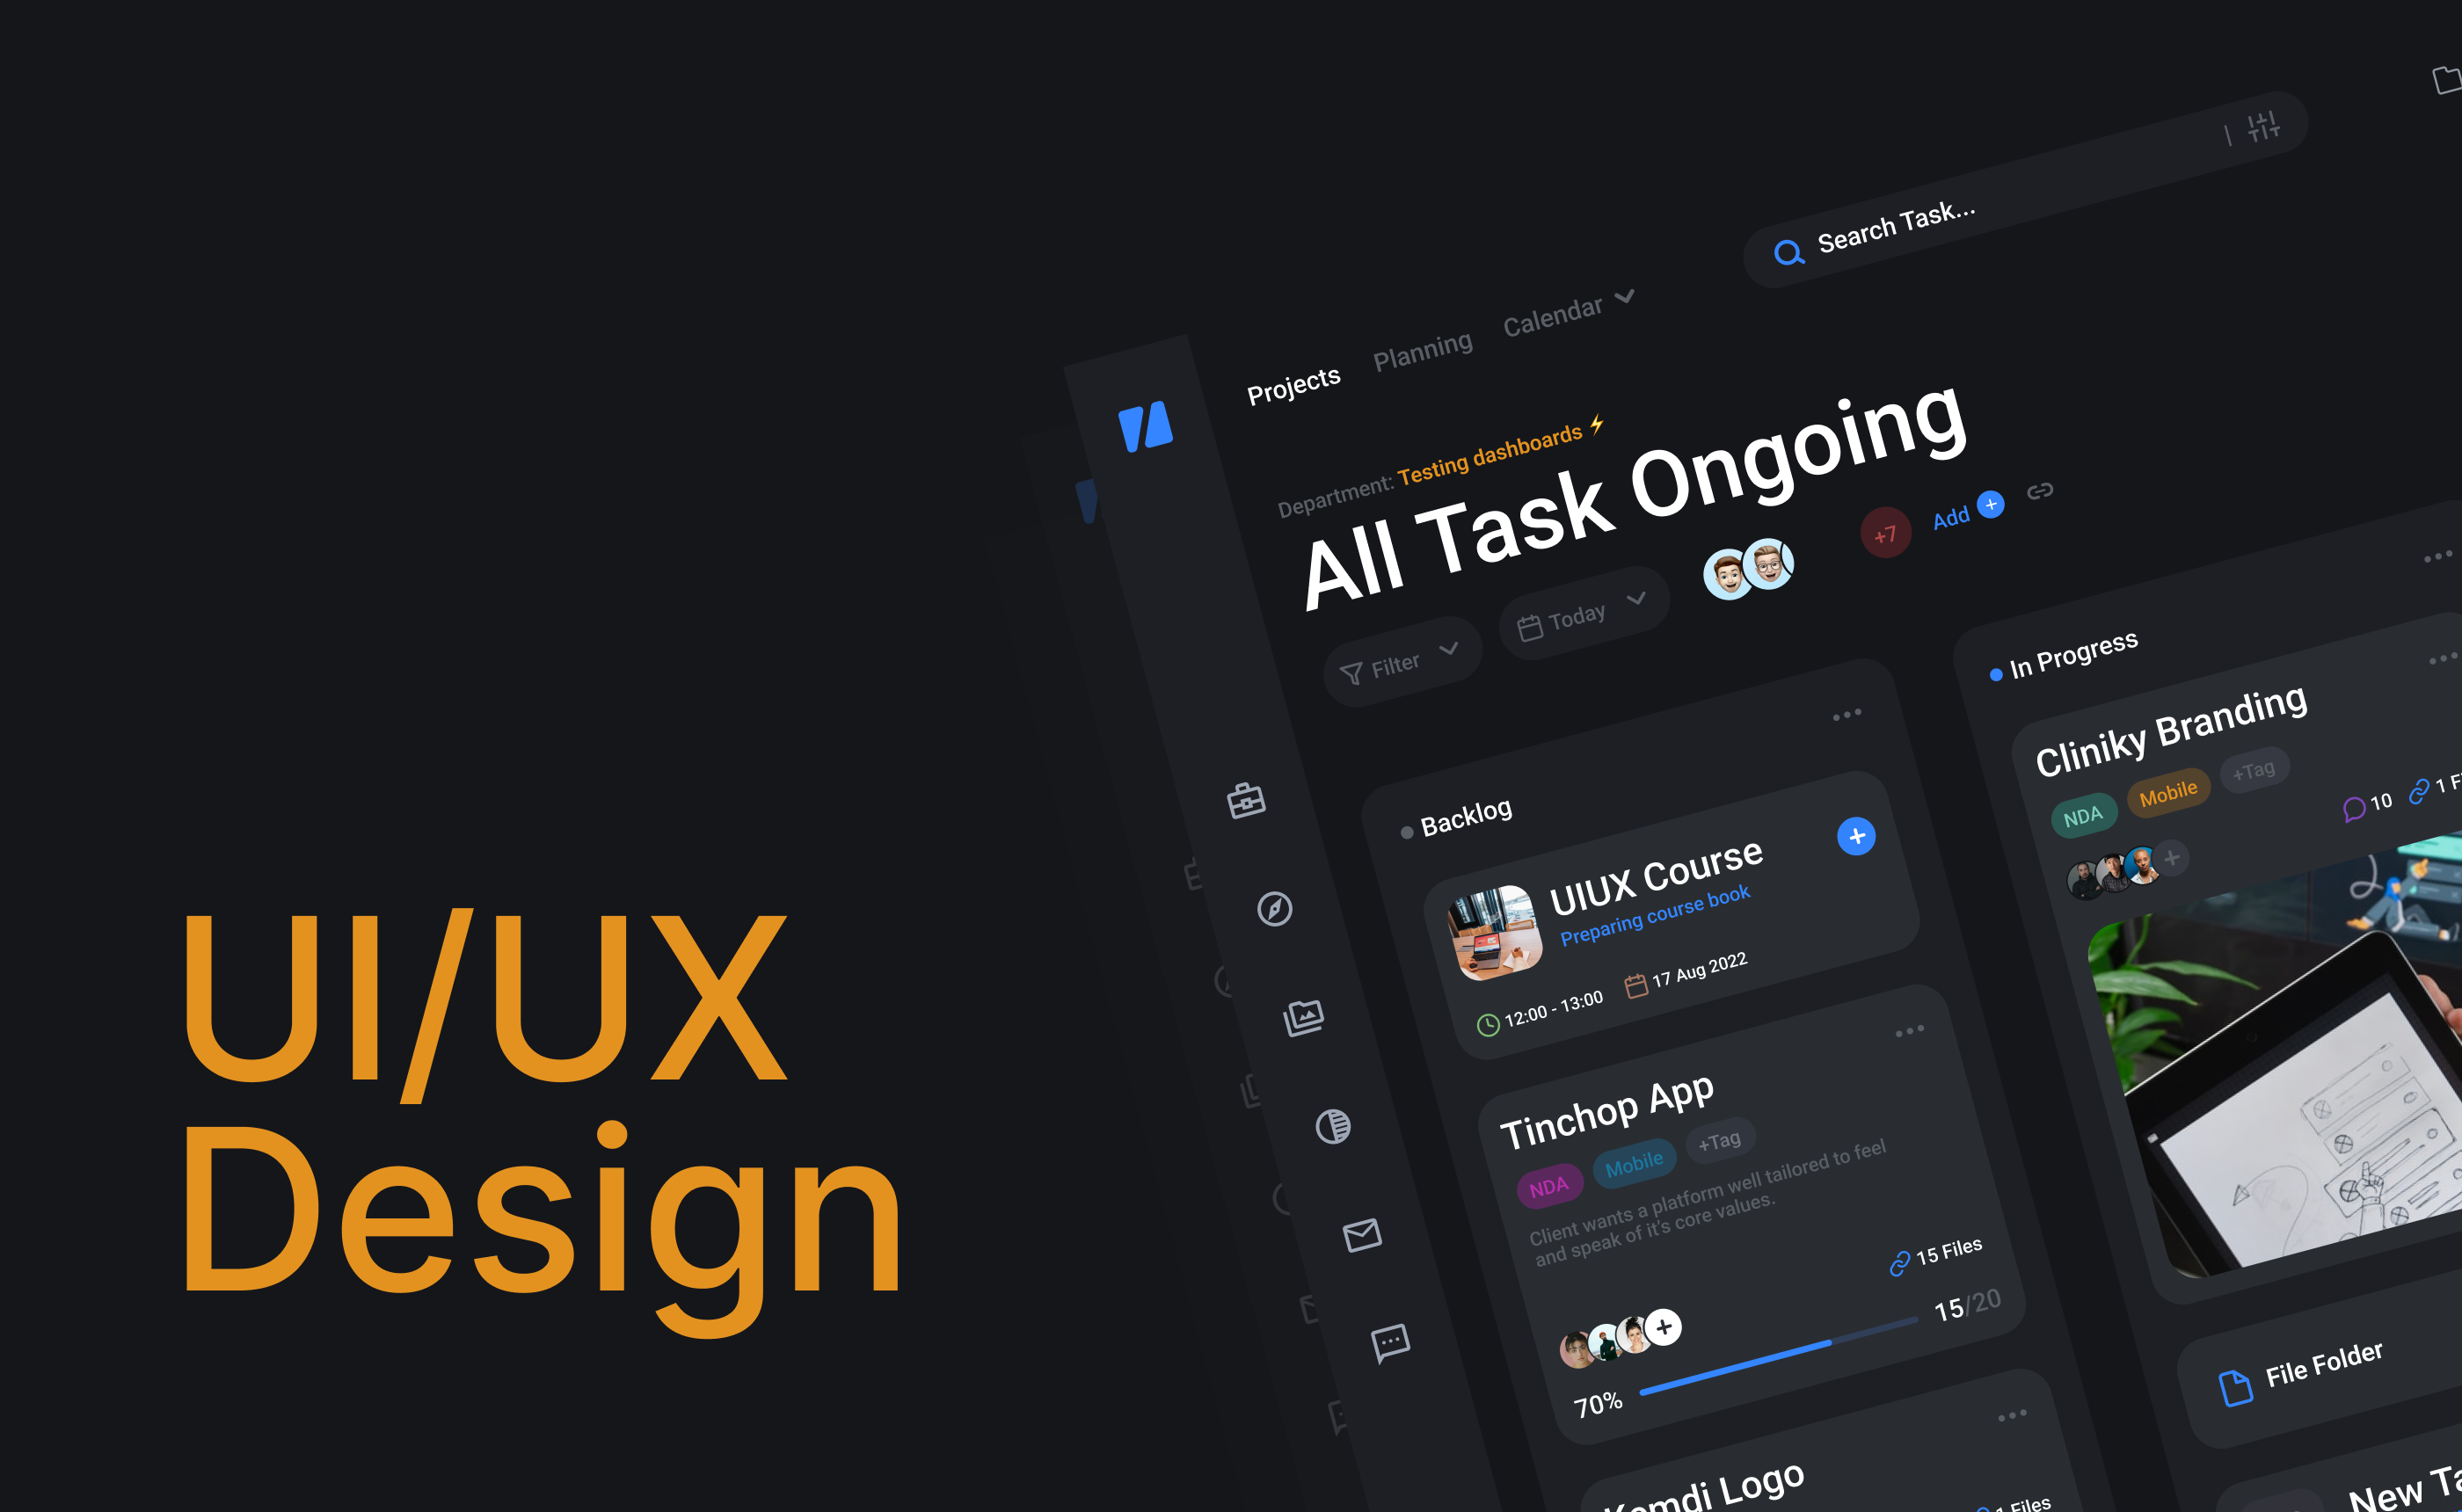 Complete UI/UX Design Course for All levels